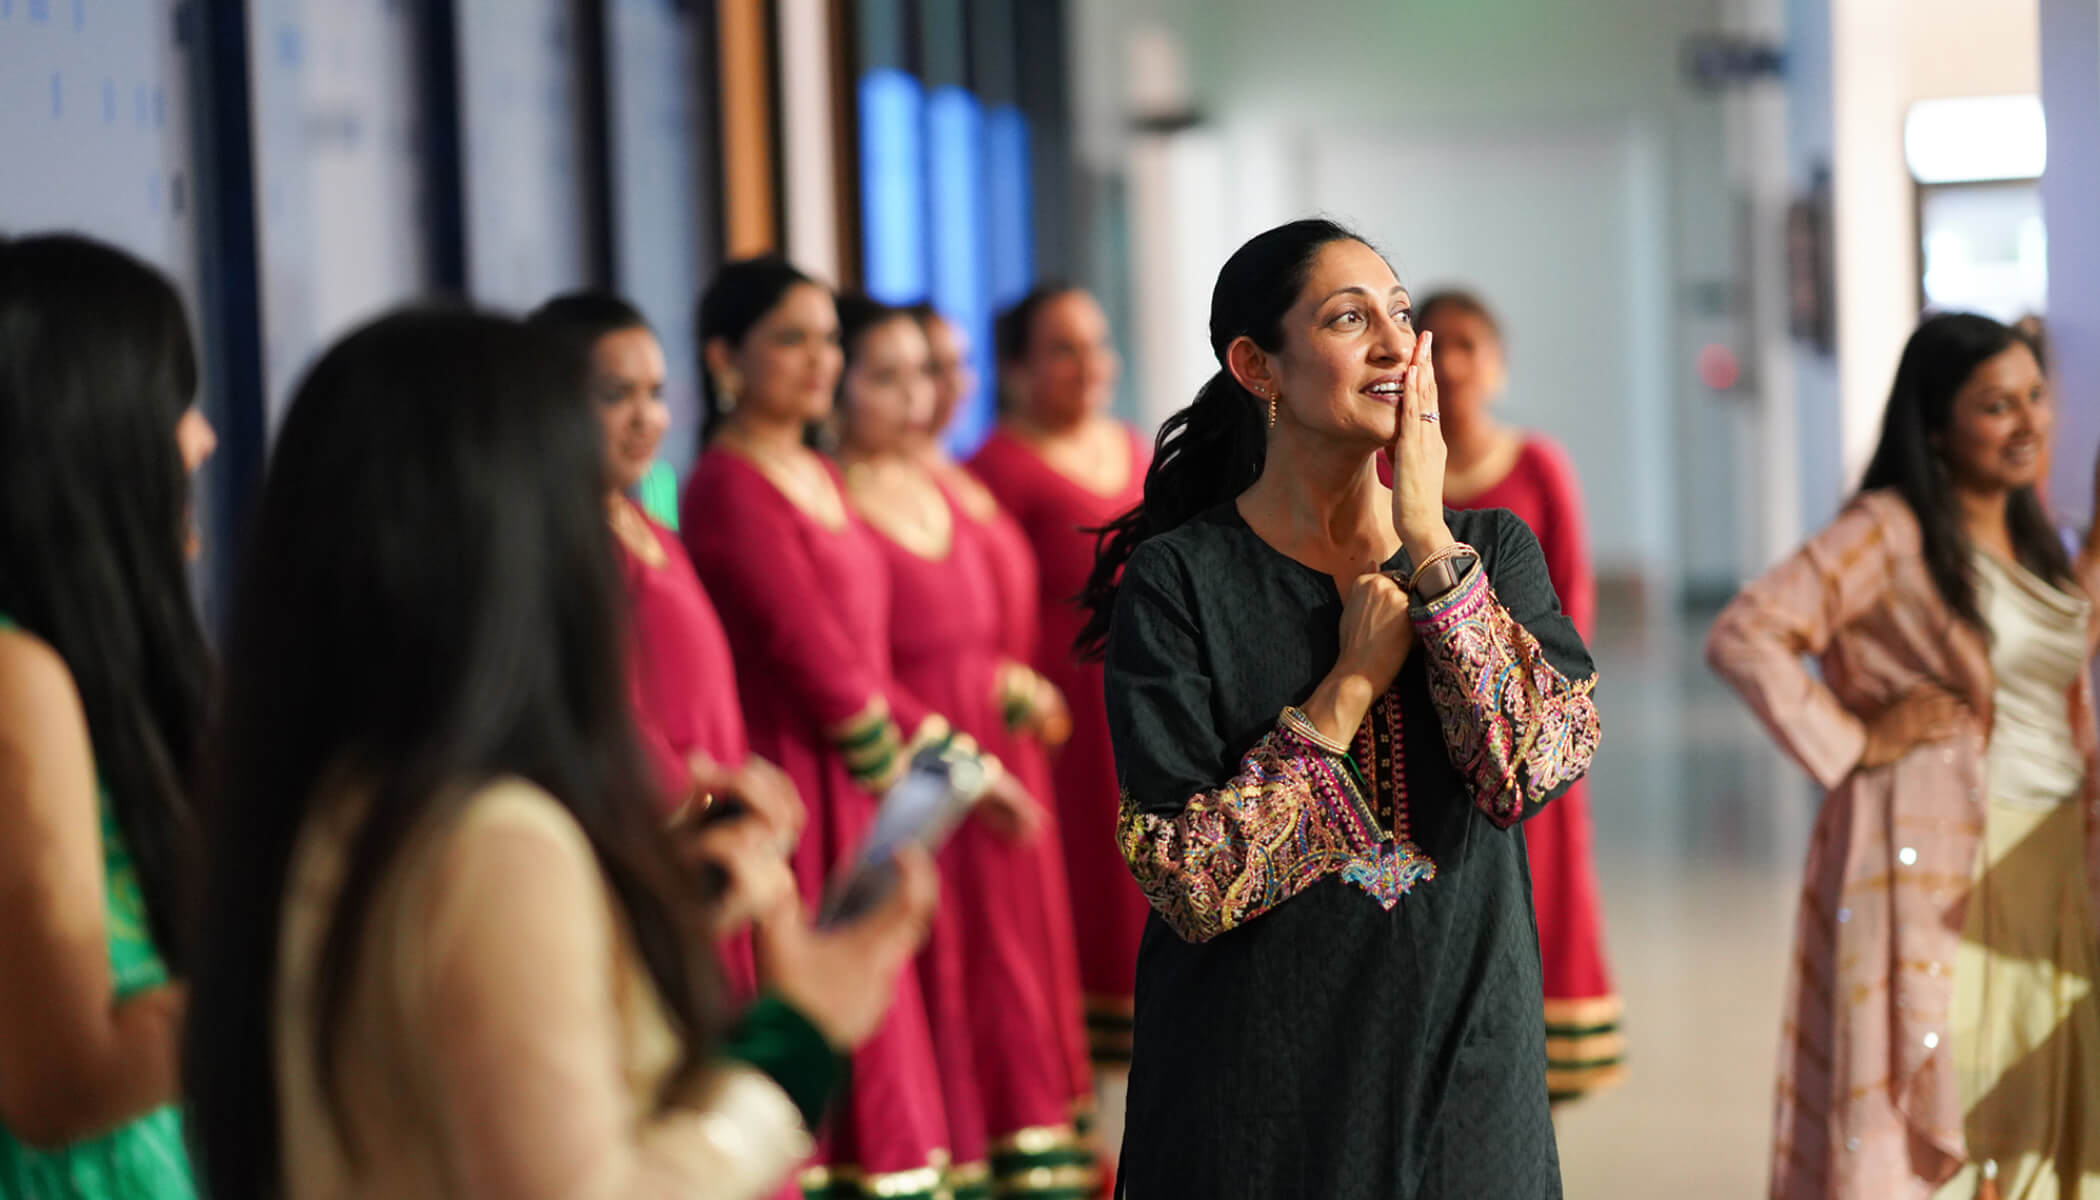 A woman in black South Asian attire touches her cheek during a performing arts event.